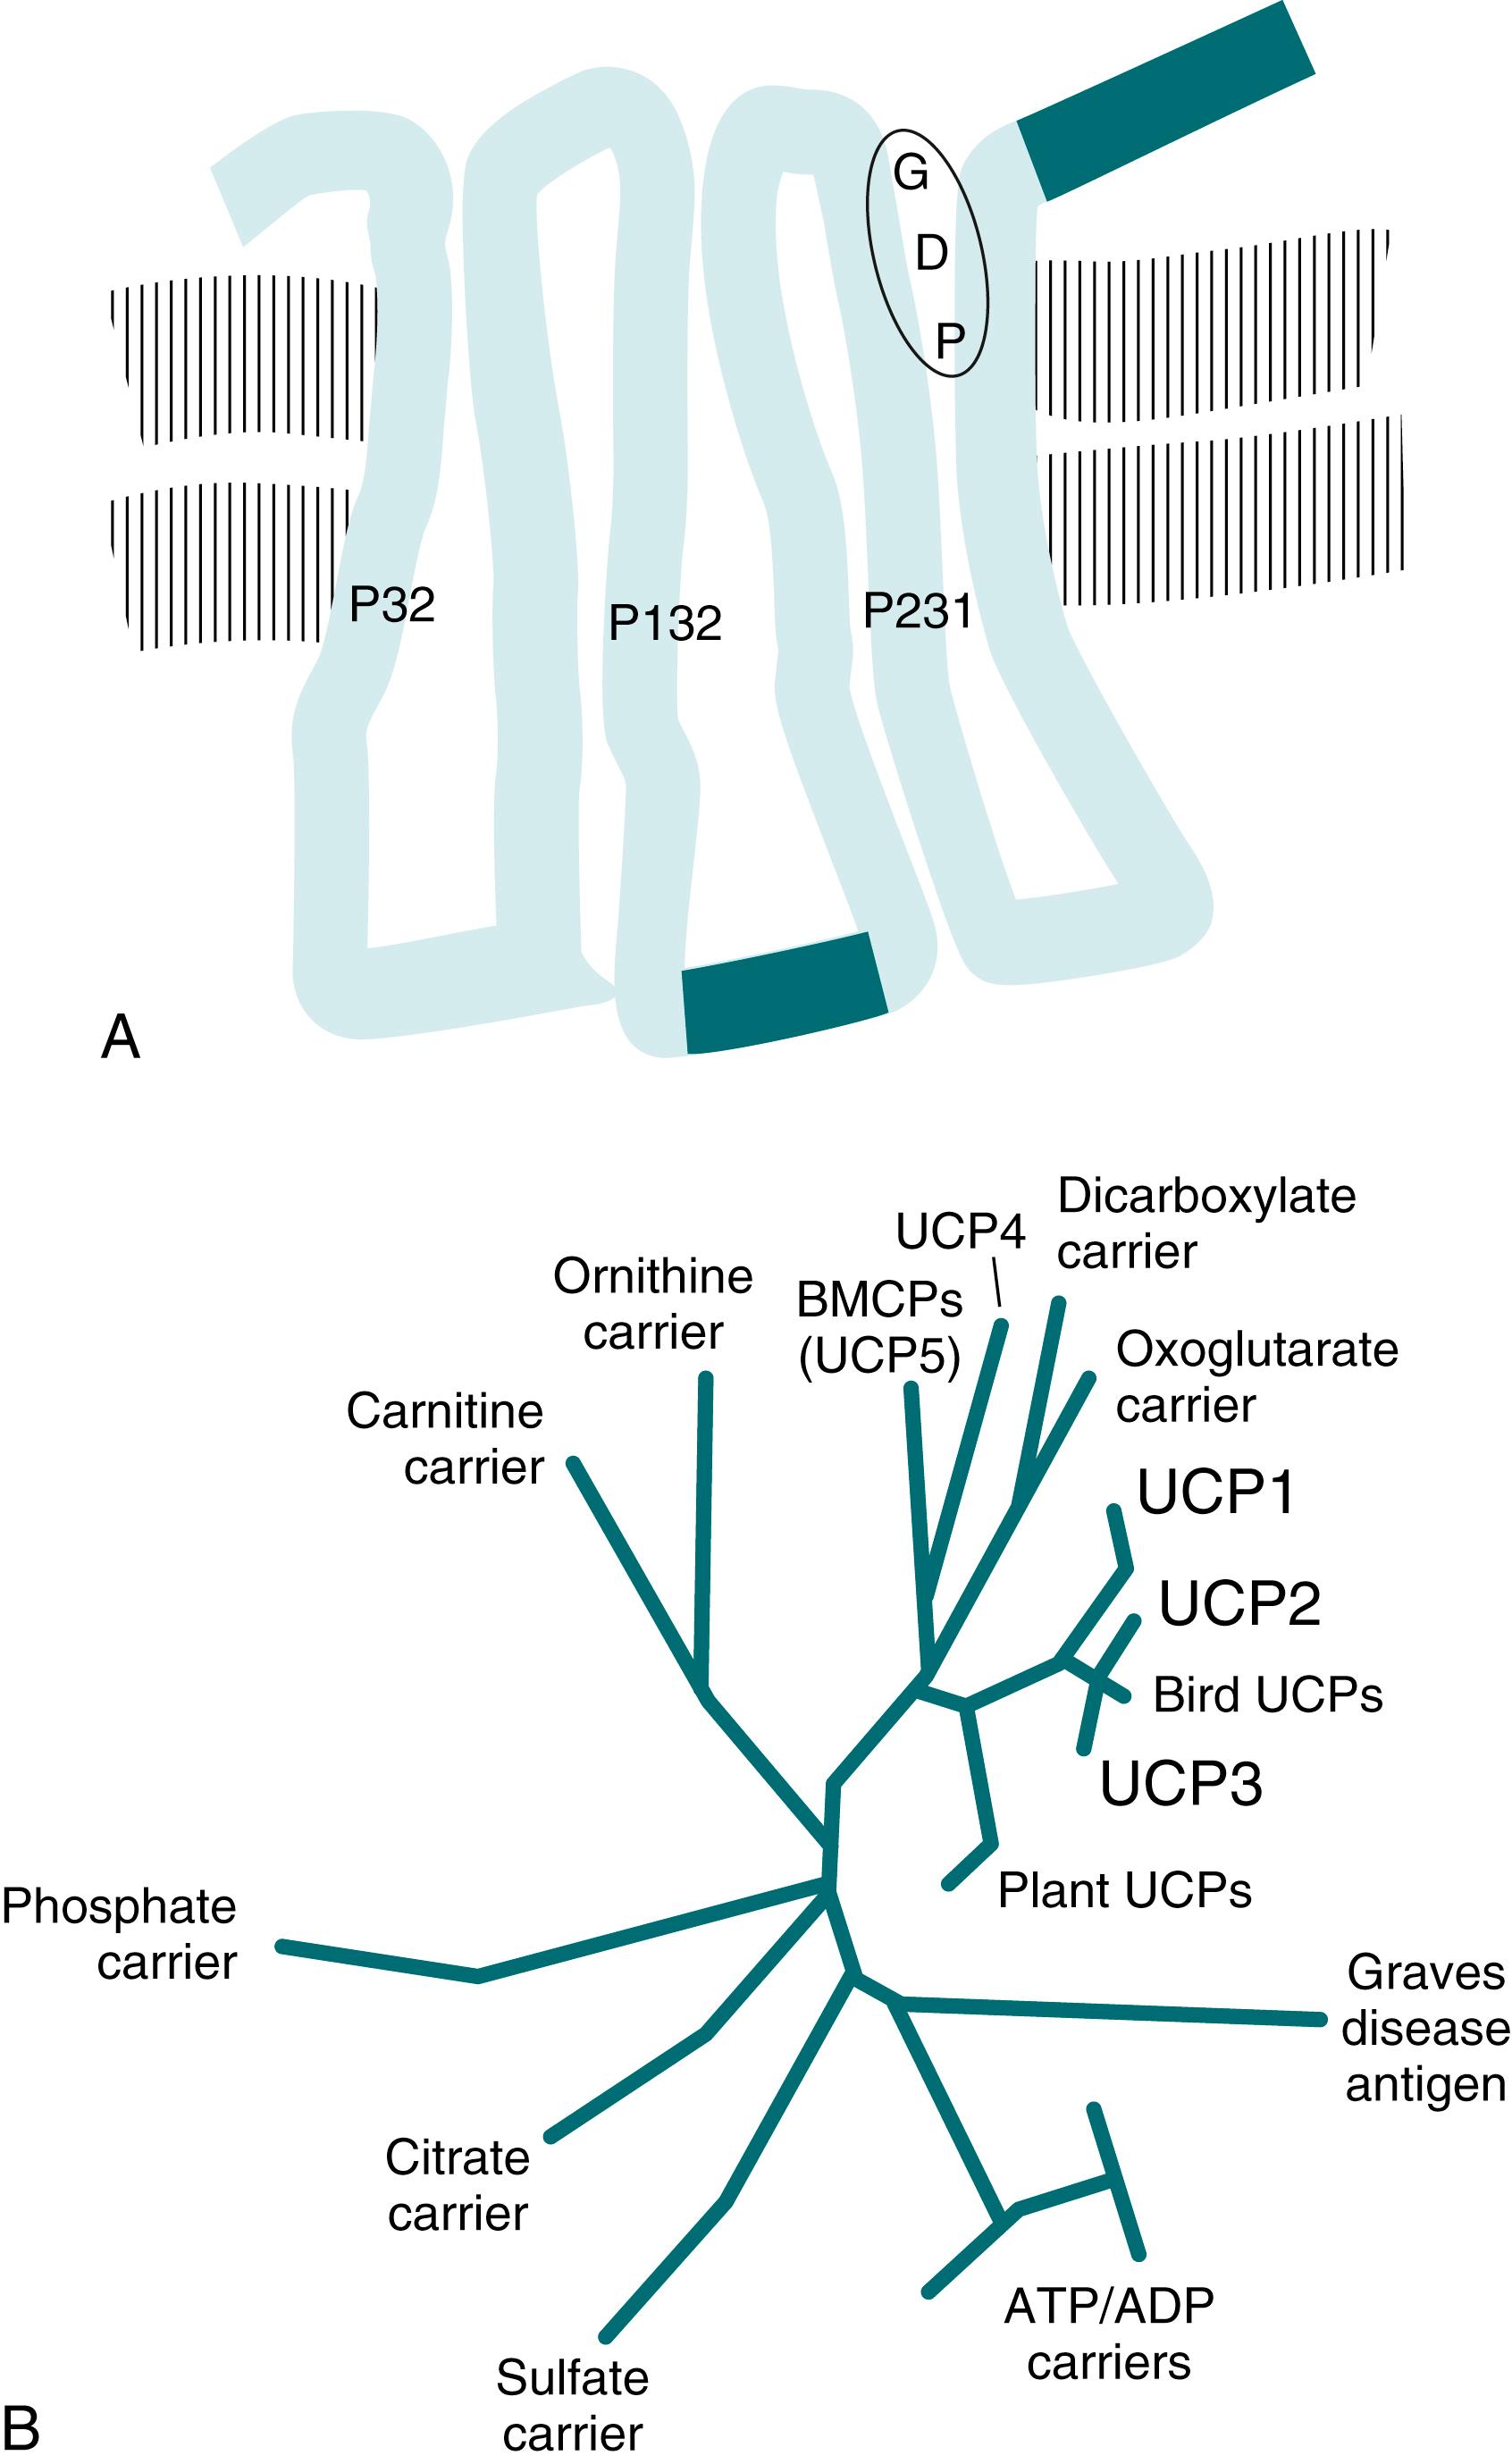 Fig. 32.2, (A) Suggested structure of uncoupling protein-1 (UCP1) . The tripartite transmembrane structure is common to members of the mitochondrial carrier protein superfamily. P32, P132, and P231 indicate proline residues conserved among all family members, and GDP denotes the general area in which nucleotide binding occurs. (B) Rootless dendrogram showing similarity between members of the mitochondrial carrier protein superfamily. ADP, Adenosine diphosphate; ATP, adenosine triphosphate; BMCPs, brain mitochondrial carrier proteins; GDP, guanosine diphosphate.